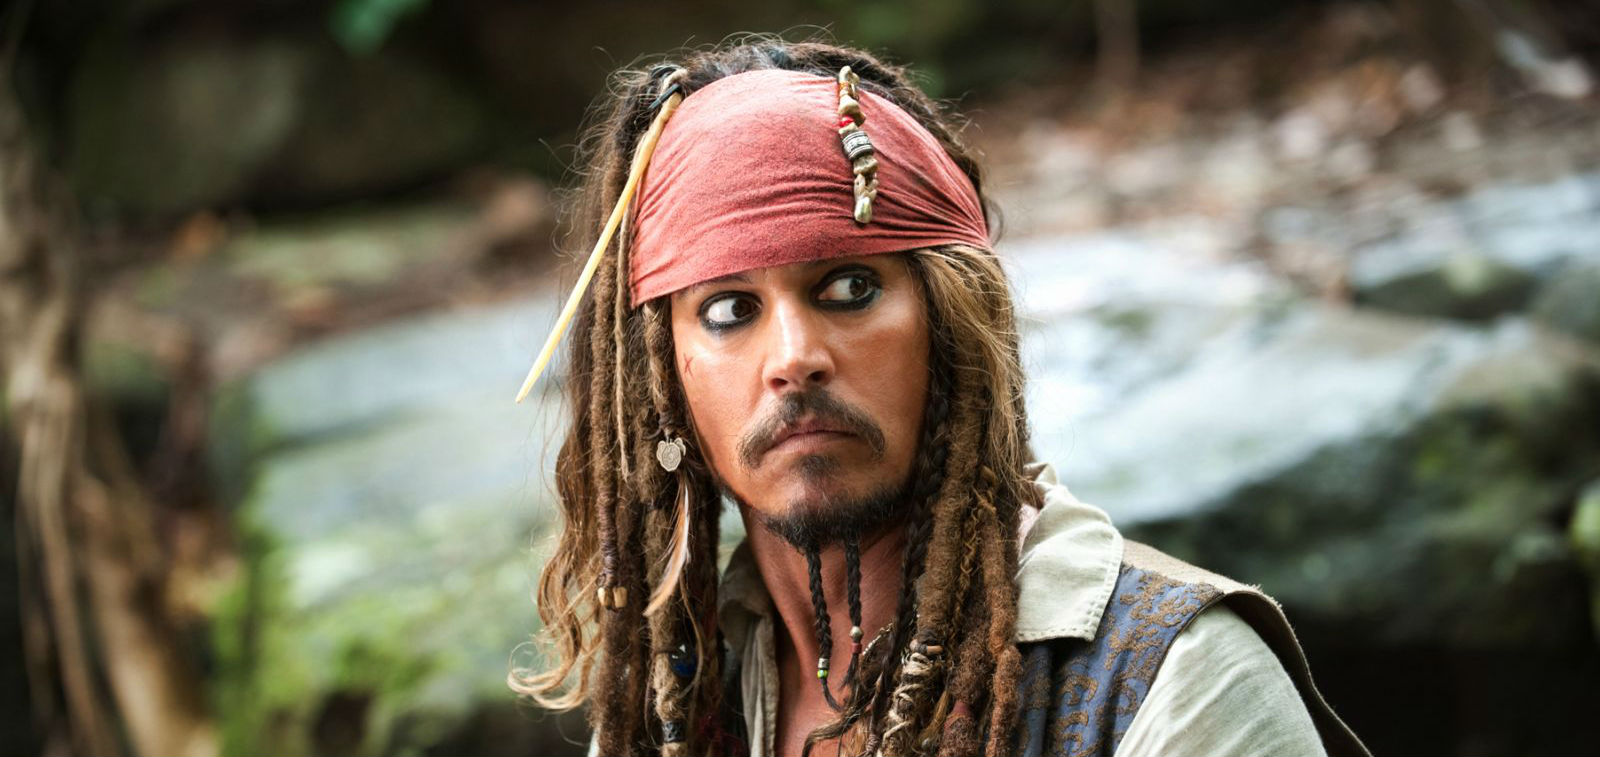 Pirates Of The Caribbean 5 Just Added Paul McCartney To Its Cast